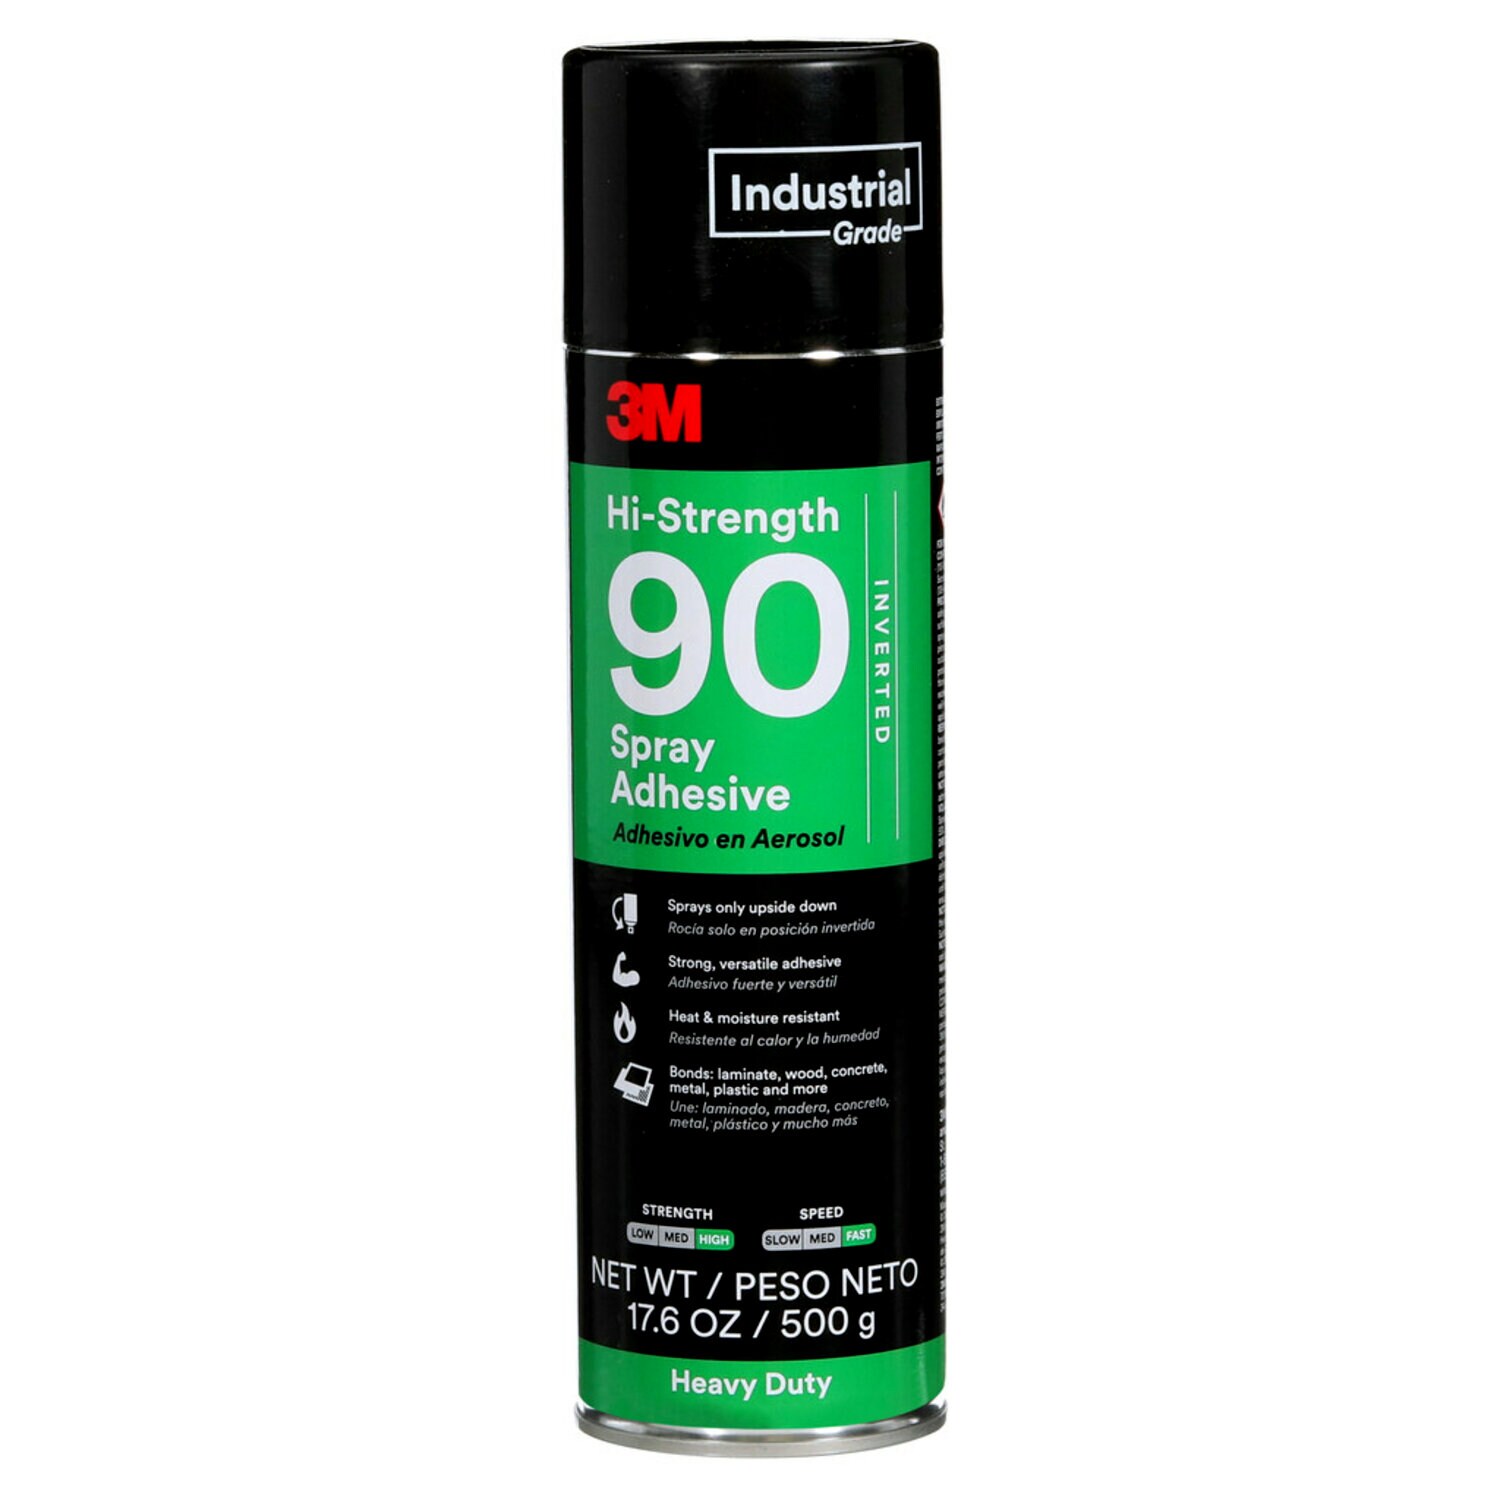 7010292719 - 3M Hi-Strength Spray Adhesive 90, Inverted, Clear, 24 fl oz Can (Net Wt
17.6 oz), 12/Case, NOT FOR SALE IN CA AND OTHER STATES